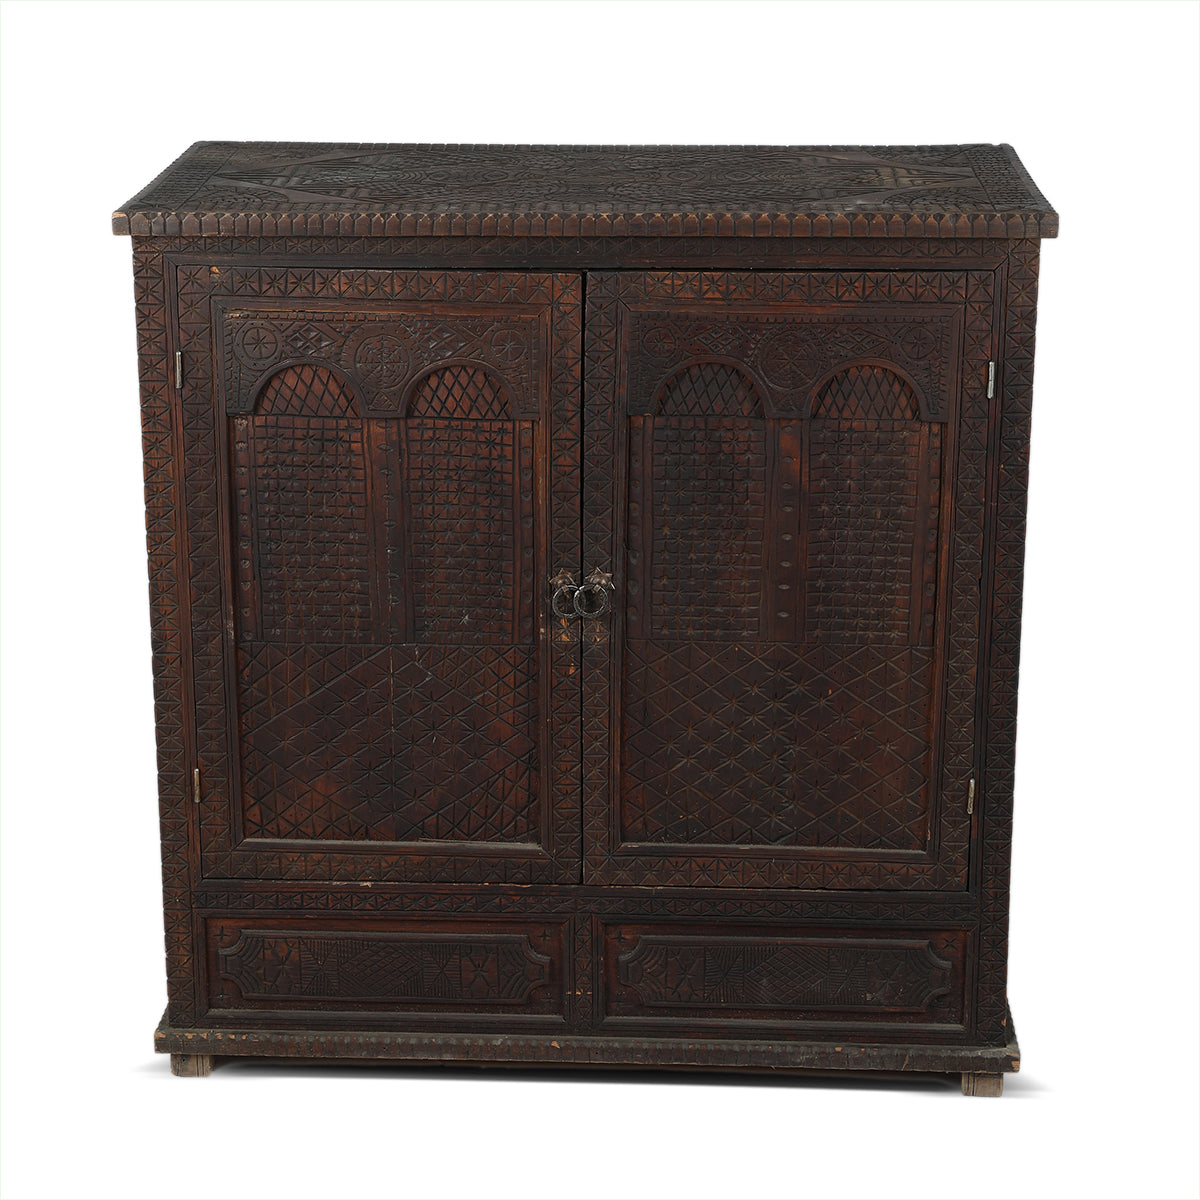 Front View of Vintage Wood Cabinet